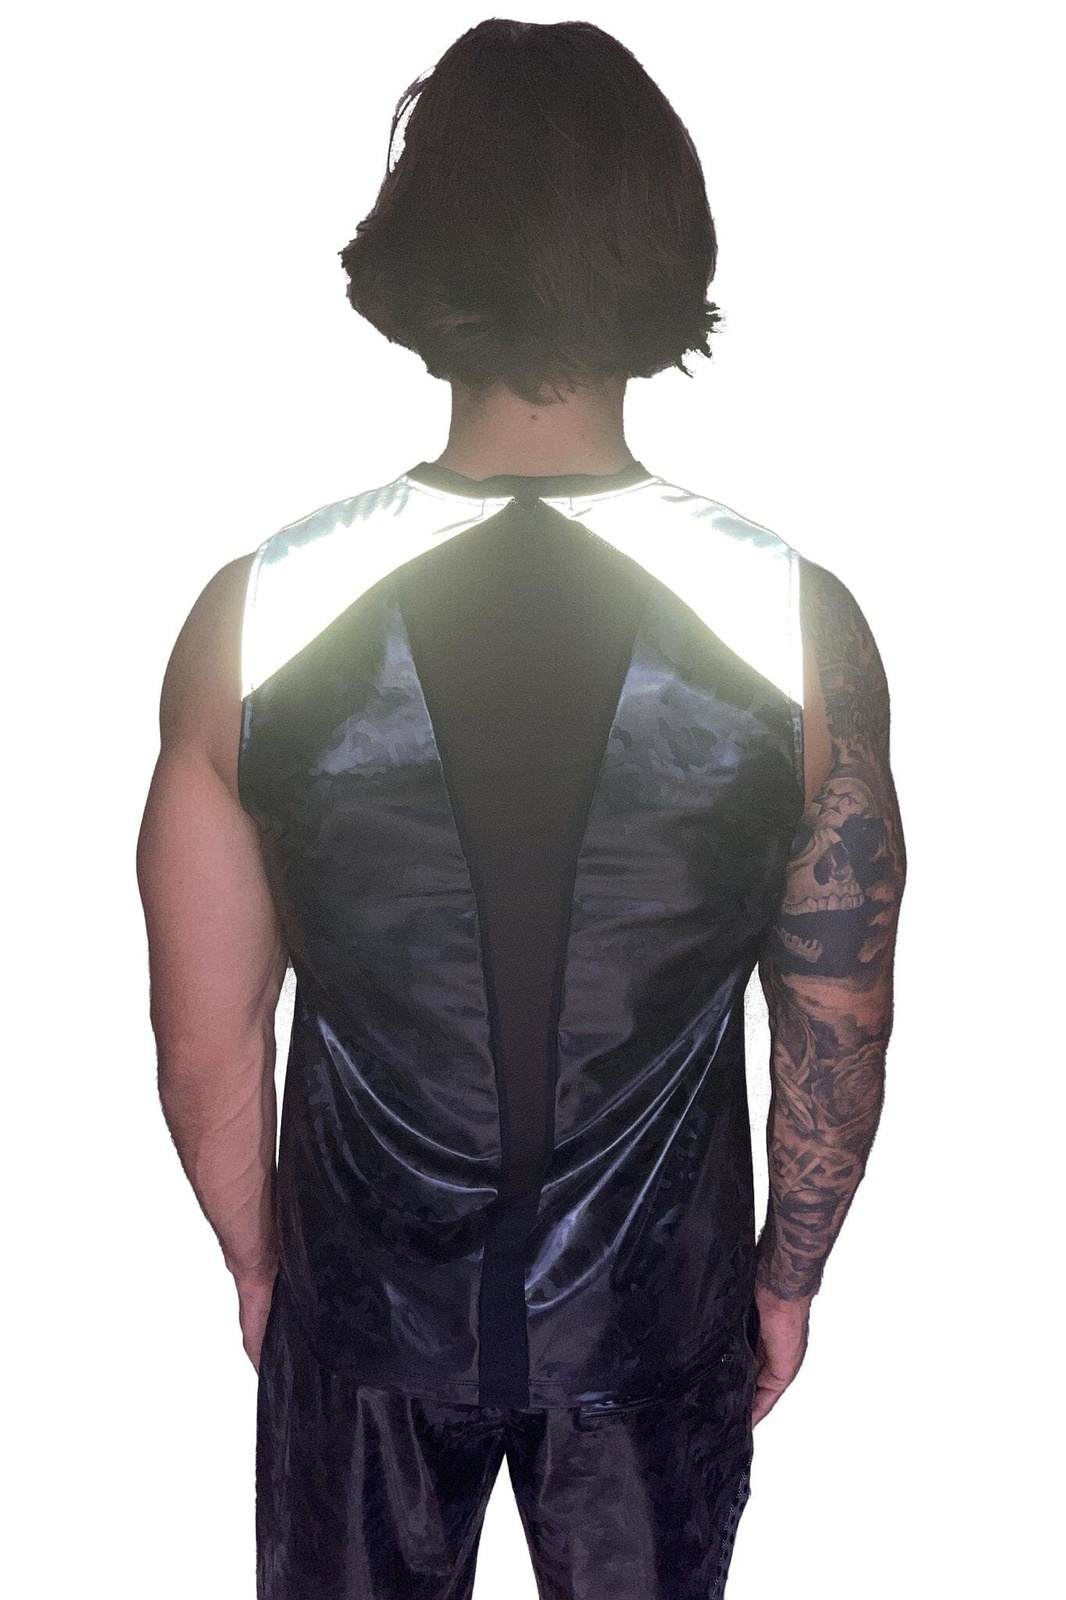 Reflective Black Camo print Muscle tee for men from Love khaos festival clothing brand